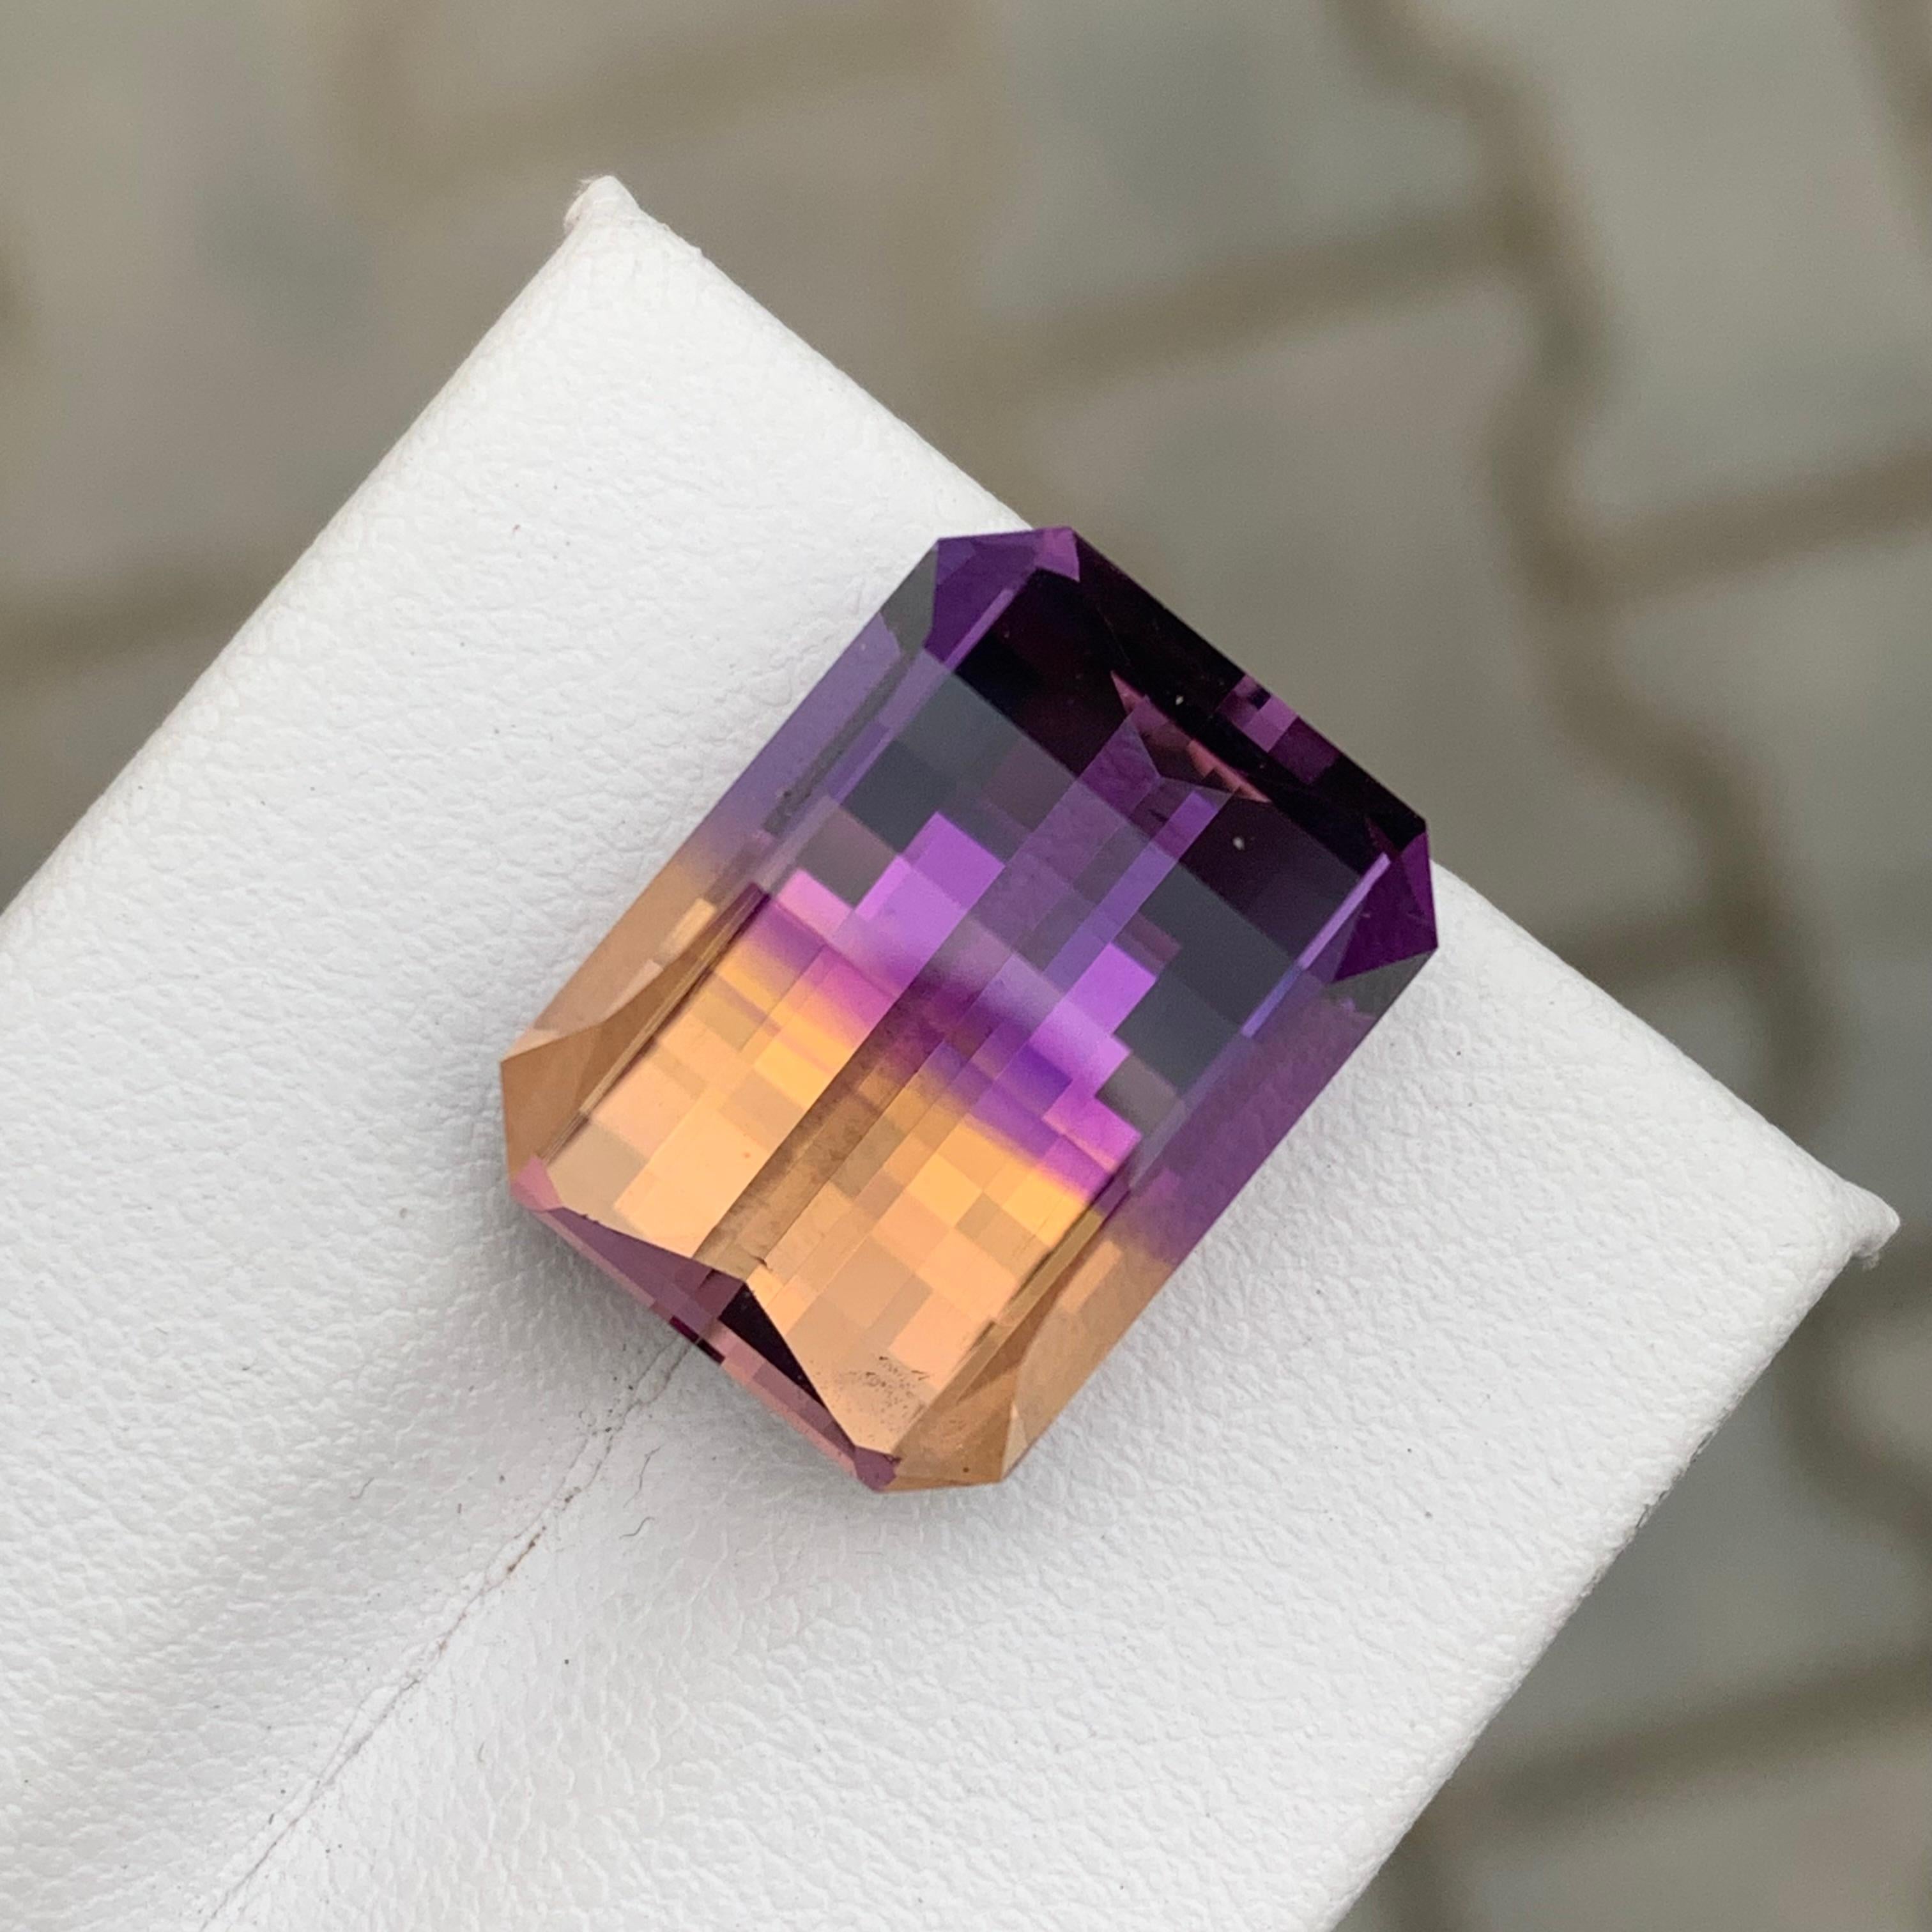 Faceted Ametrine
Weight: 16.40 Carats
Dimension: 16.8x12.7x10.5 Mm
Origin: Brazil
Color: Purple & Yellow
Shape: Emerald
Cut/Facet: Pixel Cut / Pixelated Cut
Certificate: On Demand
As a stone of both balance and connection, ametrine is believed to